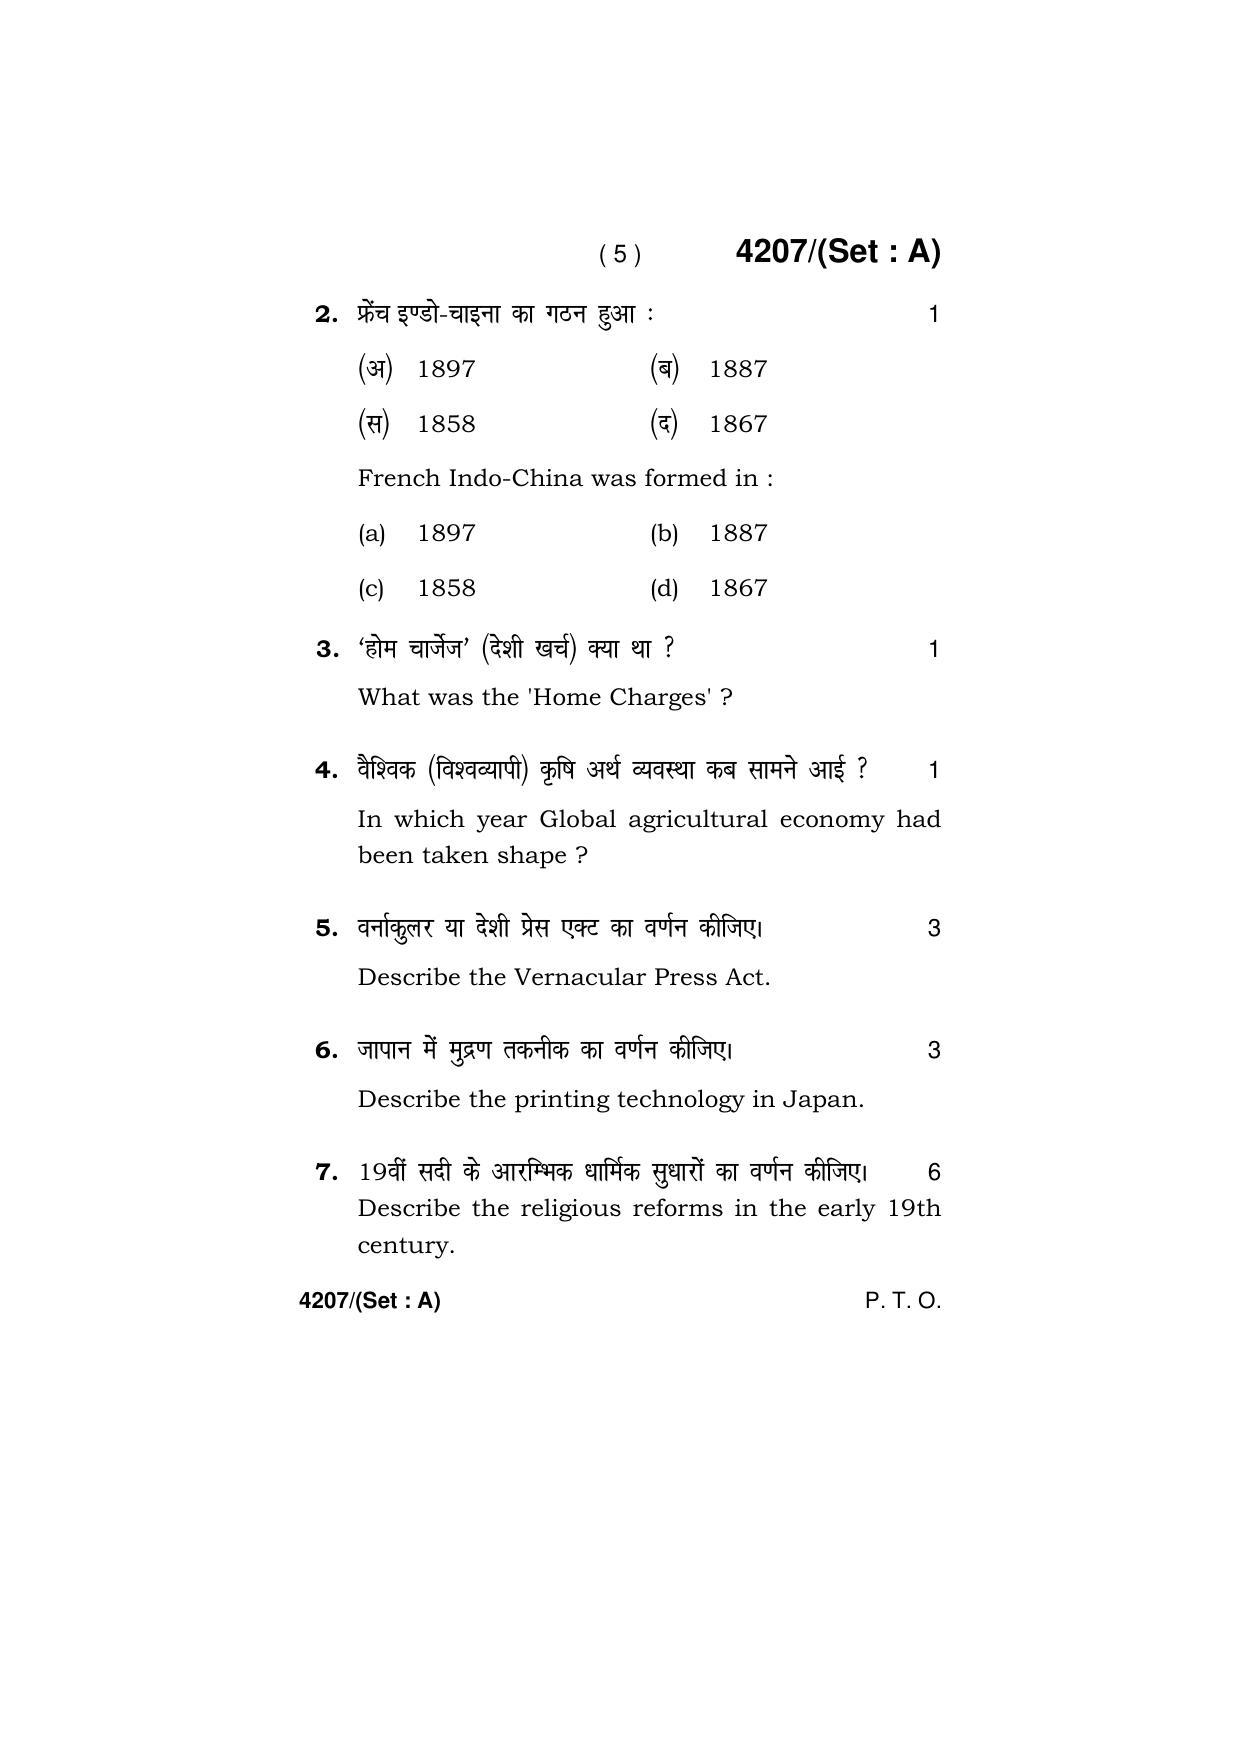 Haryana Board HBSE Class 10 Social Science (All Set) 2019 Question Paper - Page 5